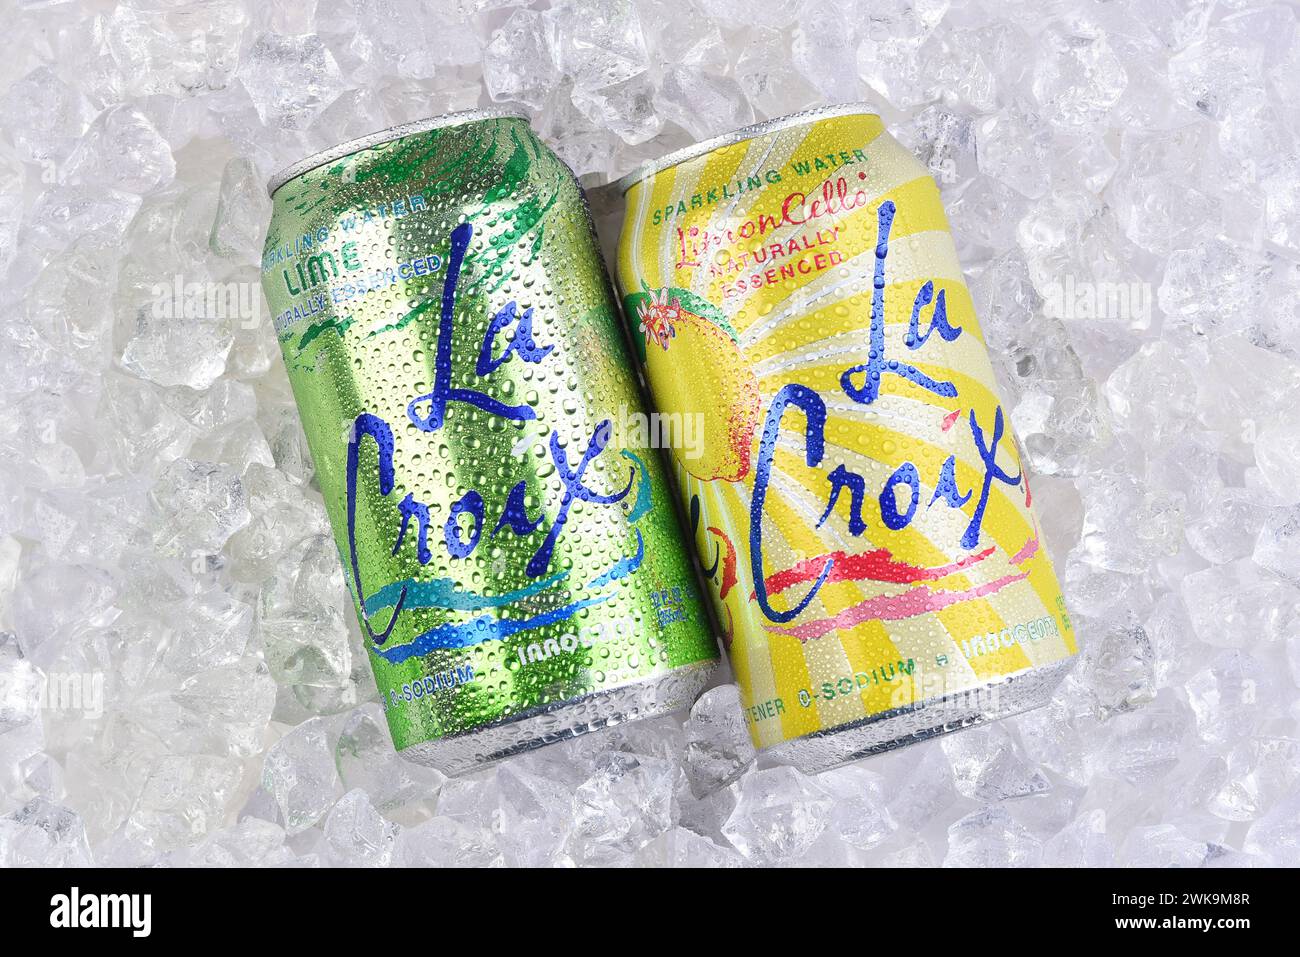 IRVINE, CALIFORNIA - 18 FEB 2024: Two cans of La Croix Sparkling Water, one Lime and one LimonCello flavored on a bed of ice. Stock Photo